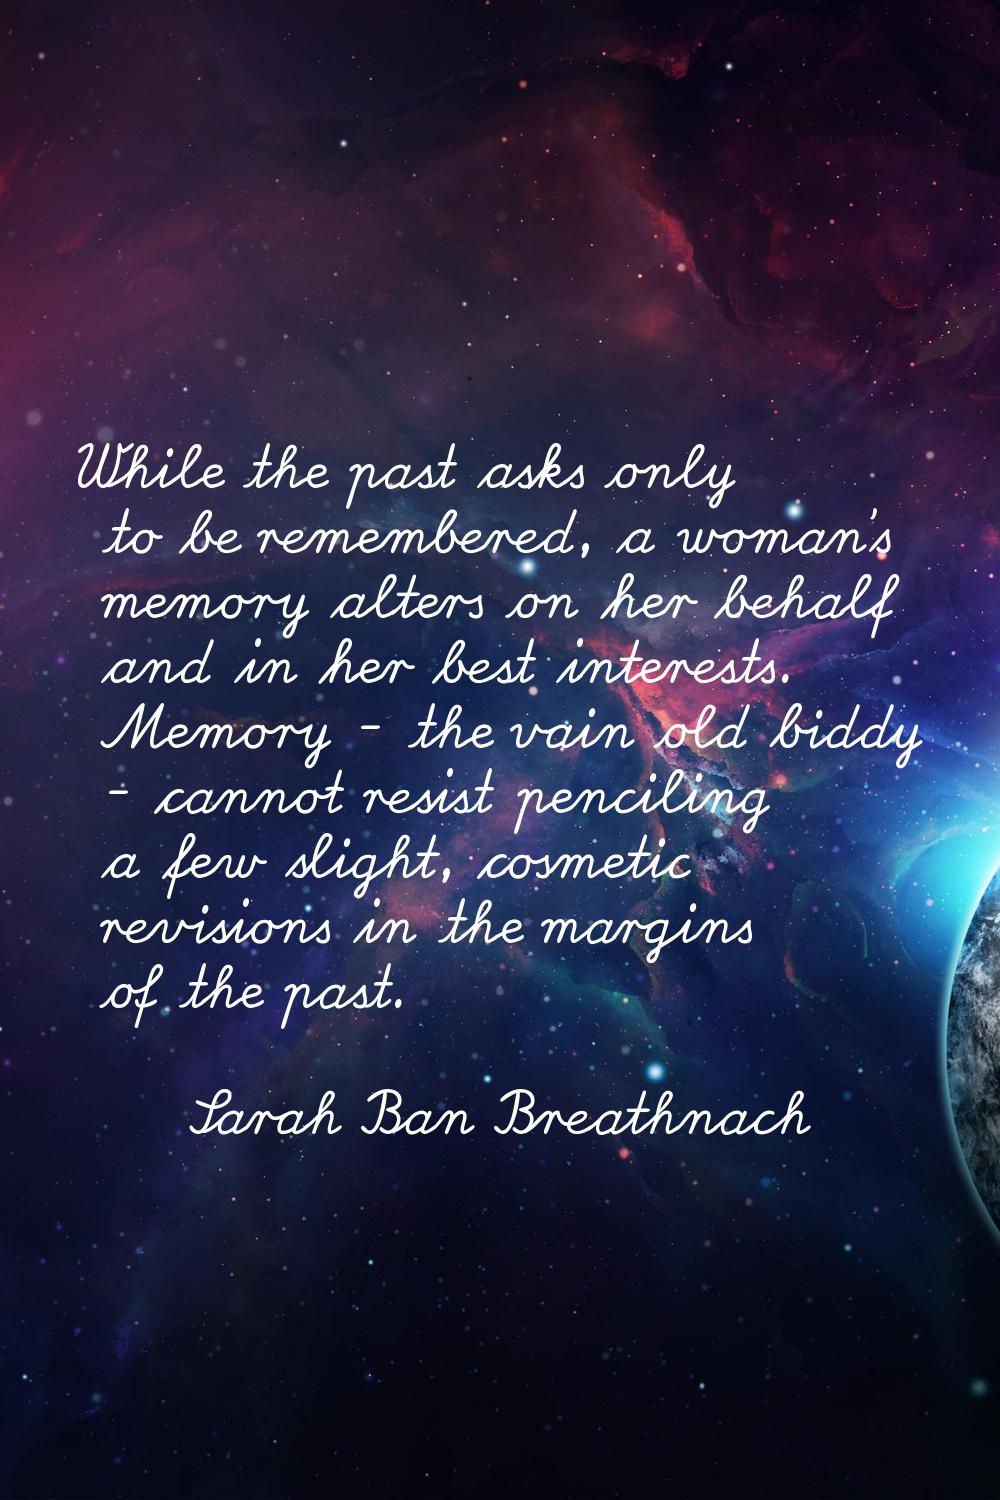 While the past asks only to be remembered, a woman's memory alters on her behalf and in her best in